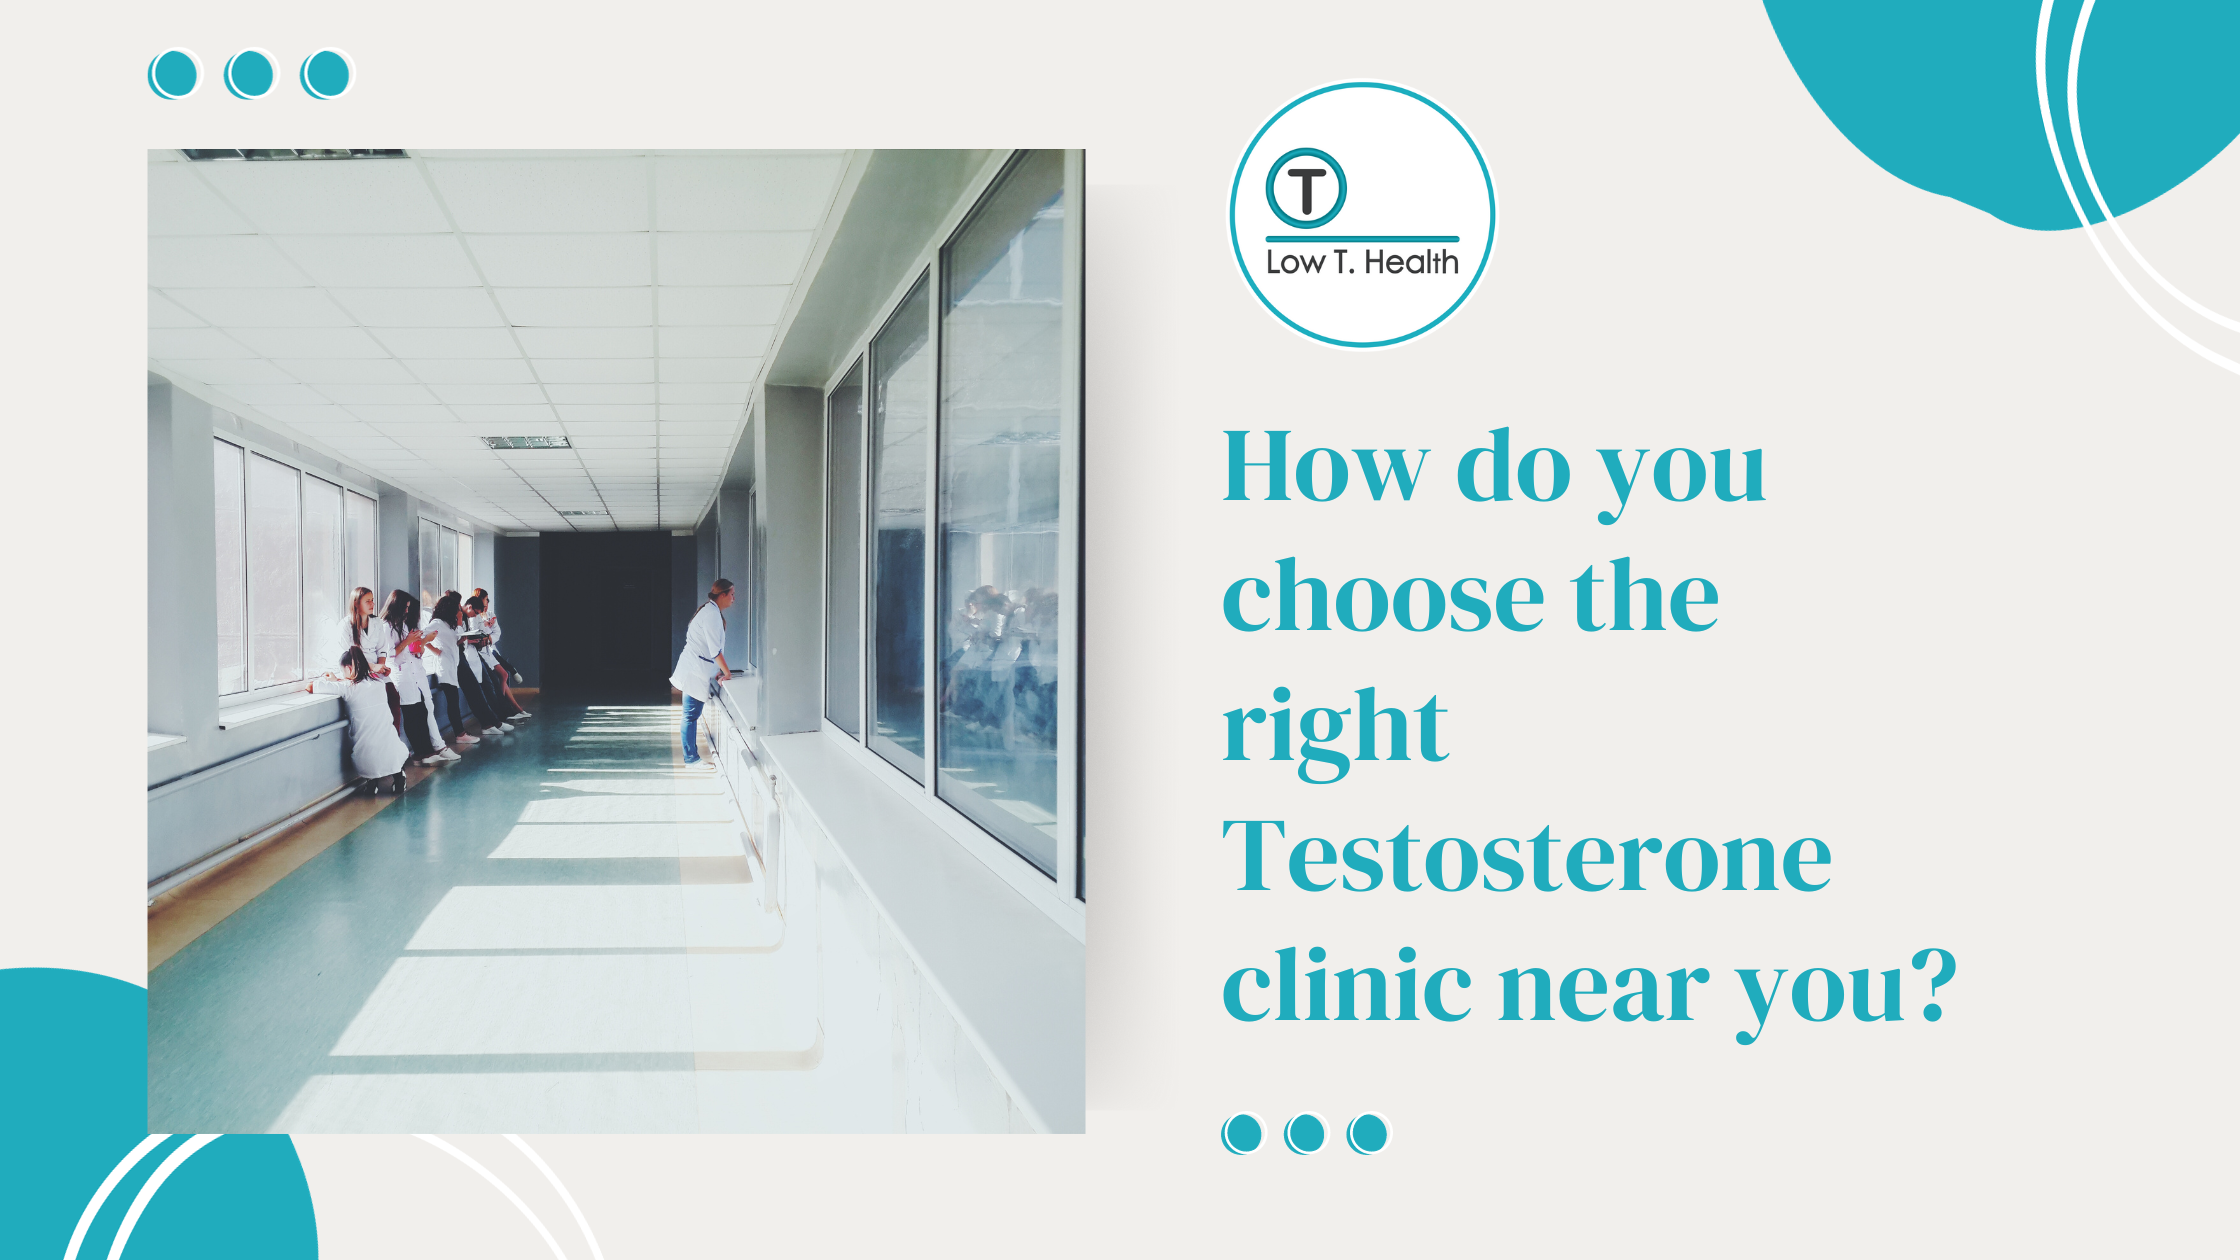 How do you choose the right Testosterone clinic near you?